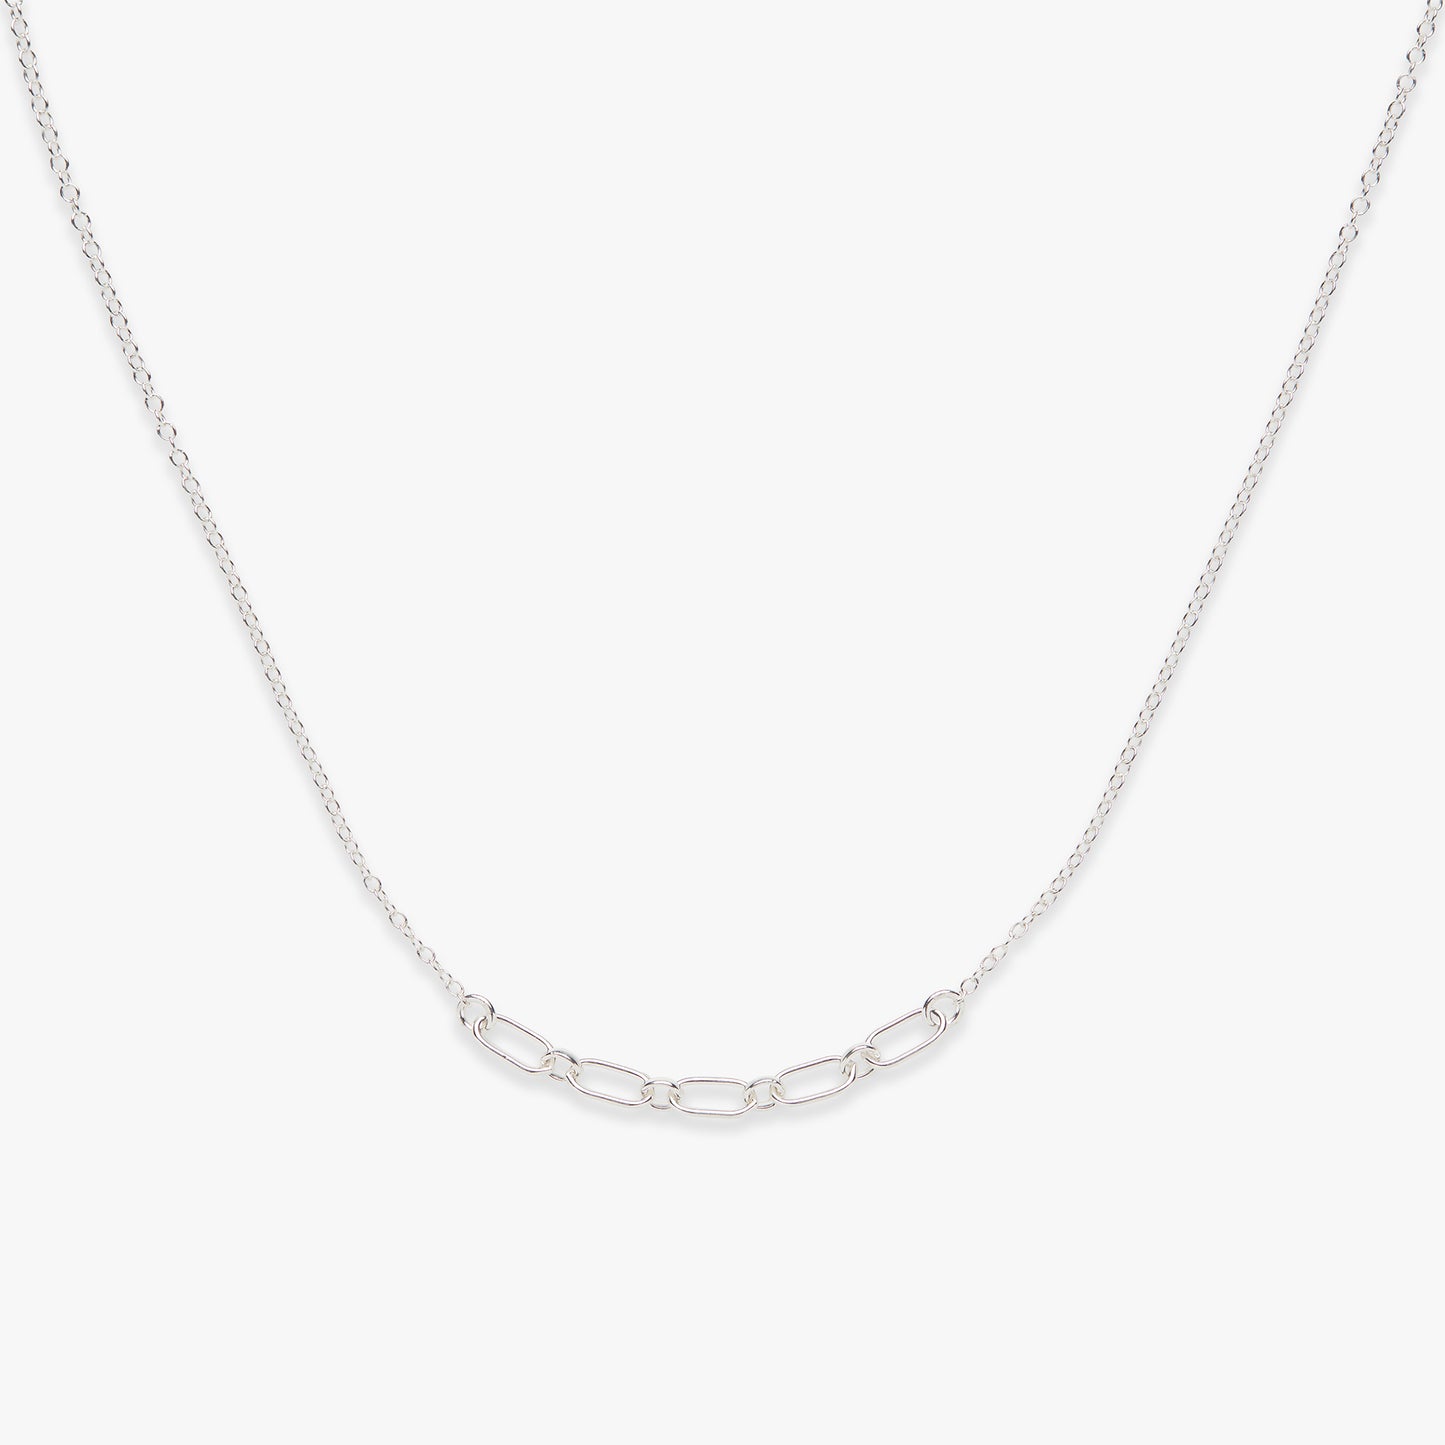 Oval links chain necklace silver